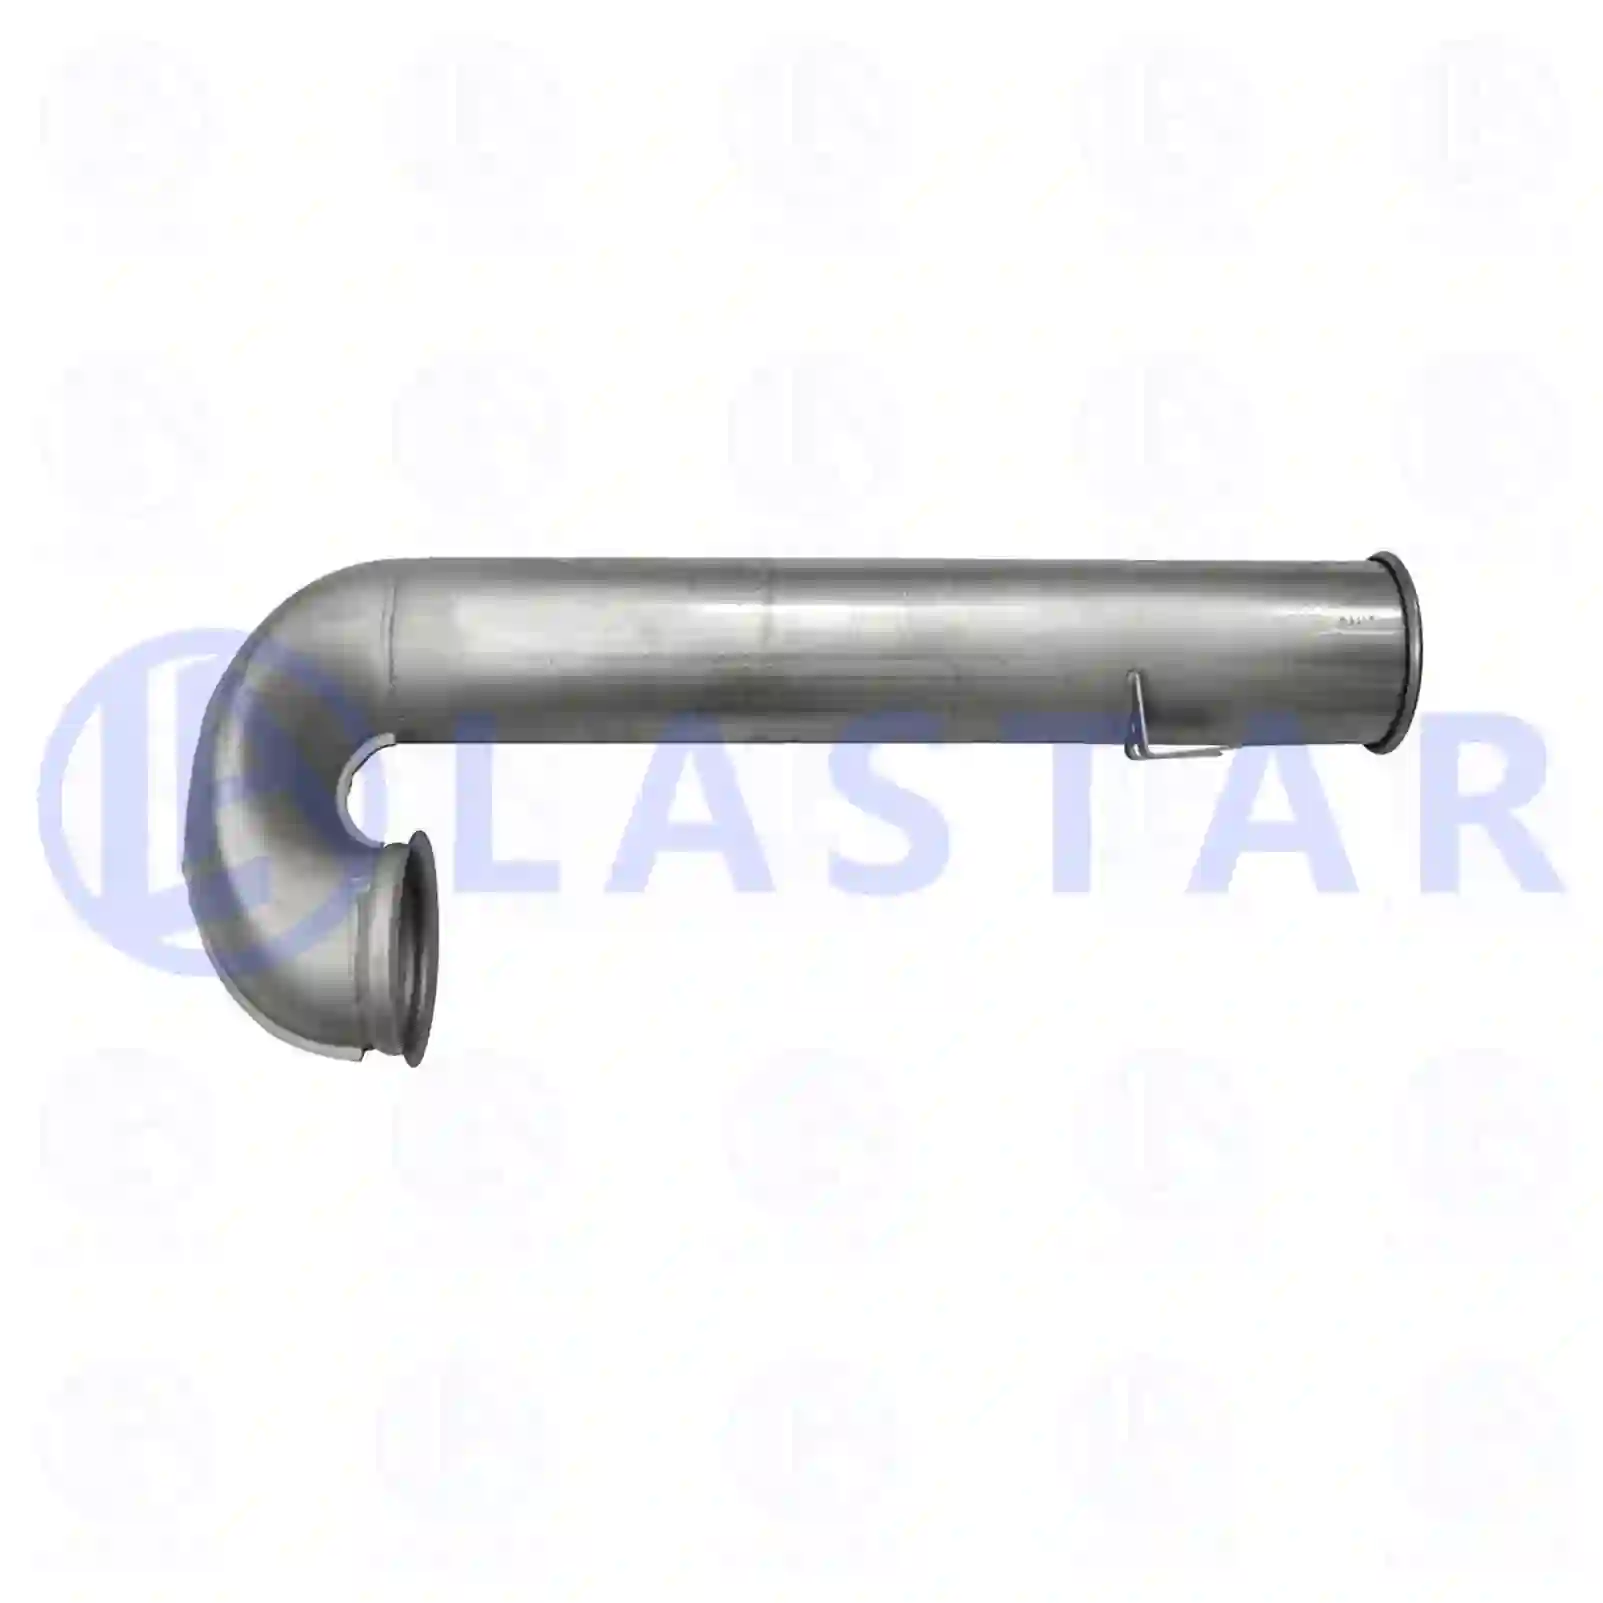 End pipe, 77706493, 1365875, 1619431, ZG10286-0008 ||  77706493 Lastar Spare Part | Truck Spare Parts, Auotomotive Spare Parts End pipe, 77706493, 1365875, 1619431, ZG10286-0008 ||  77706493 Lastar Spare Part | Truck Spare Parts, Auotomotive Spare Parts